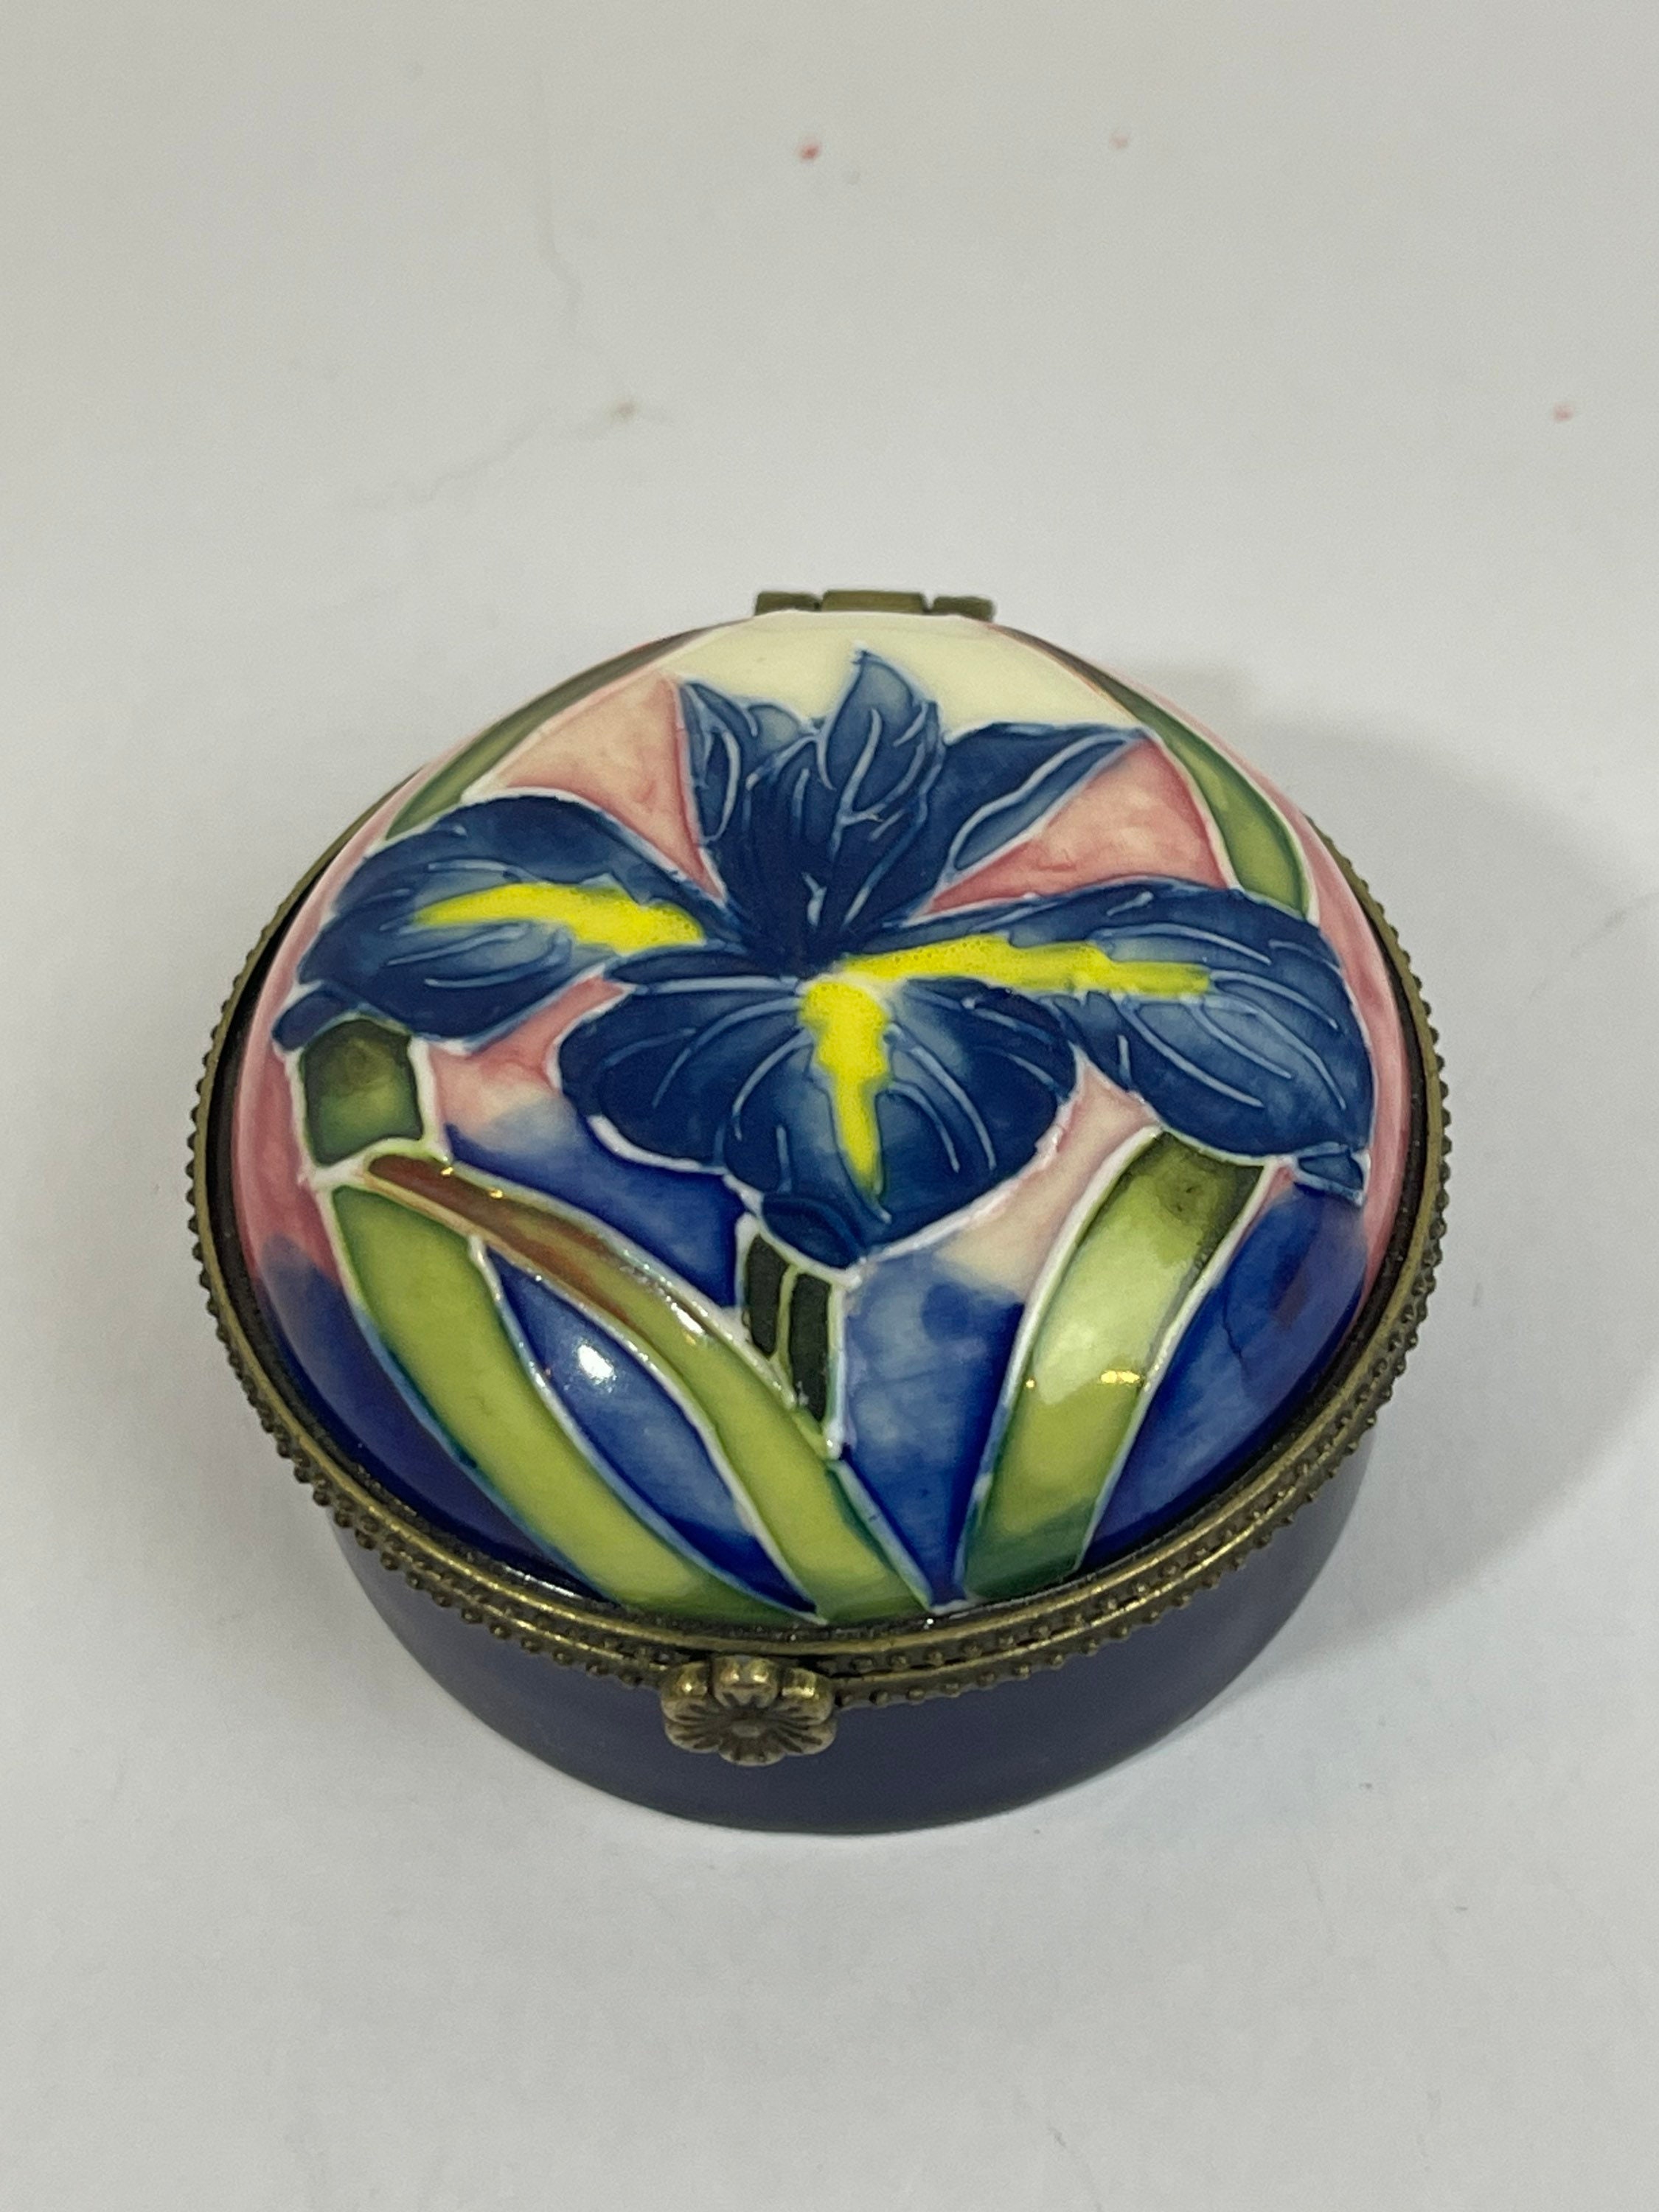 Old Tupton Ware Ceramic Trinket Box Cobalt Blue Base With Blue picture